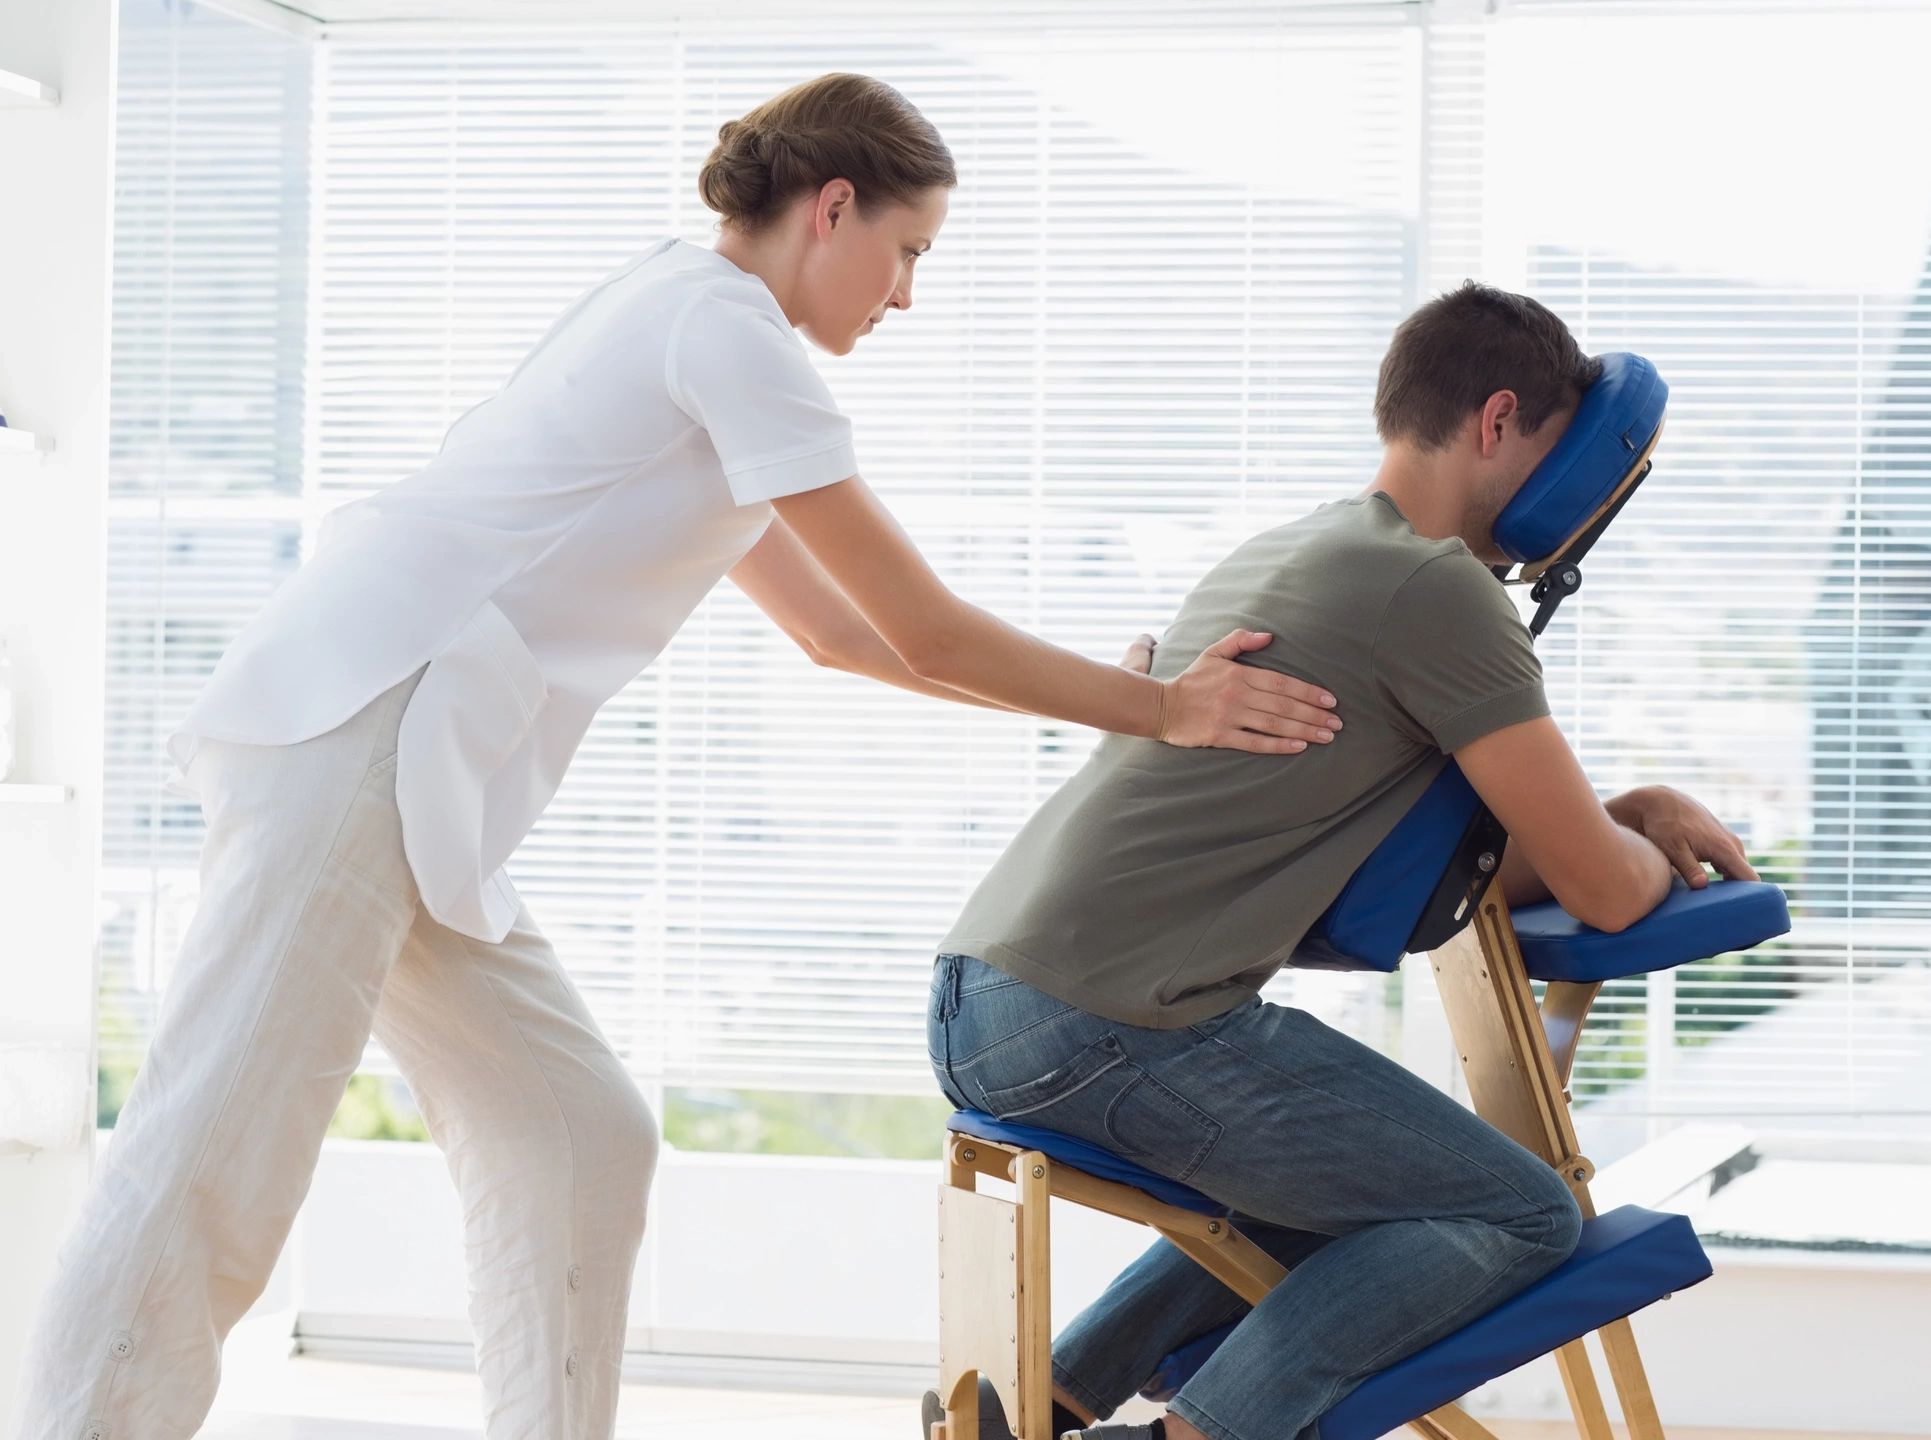 How to Find a Good Chiropractor for Your Family